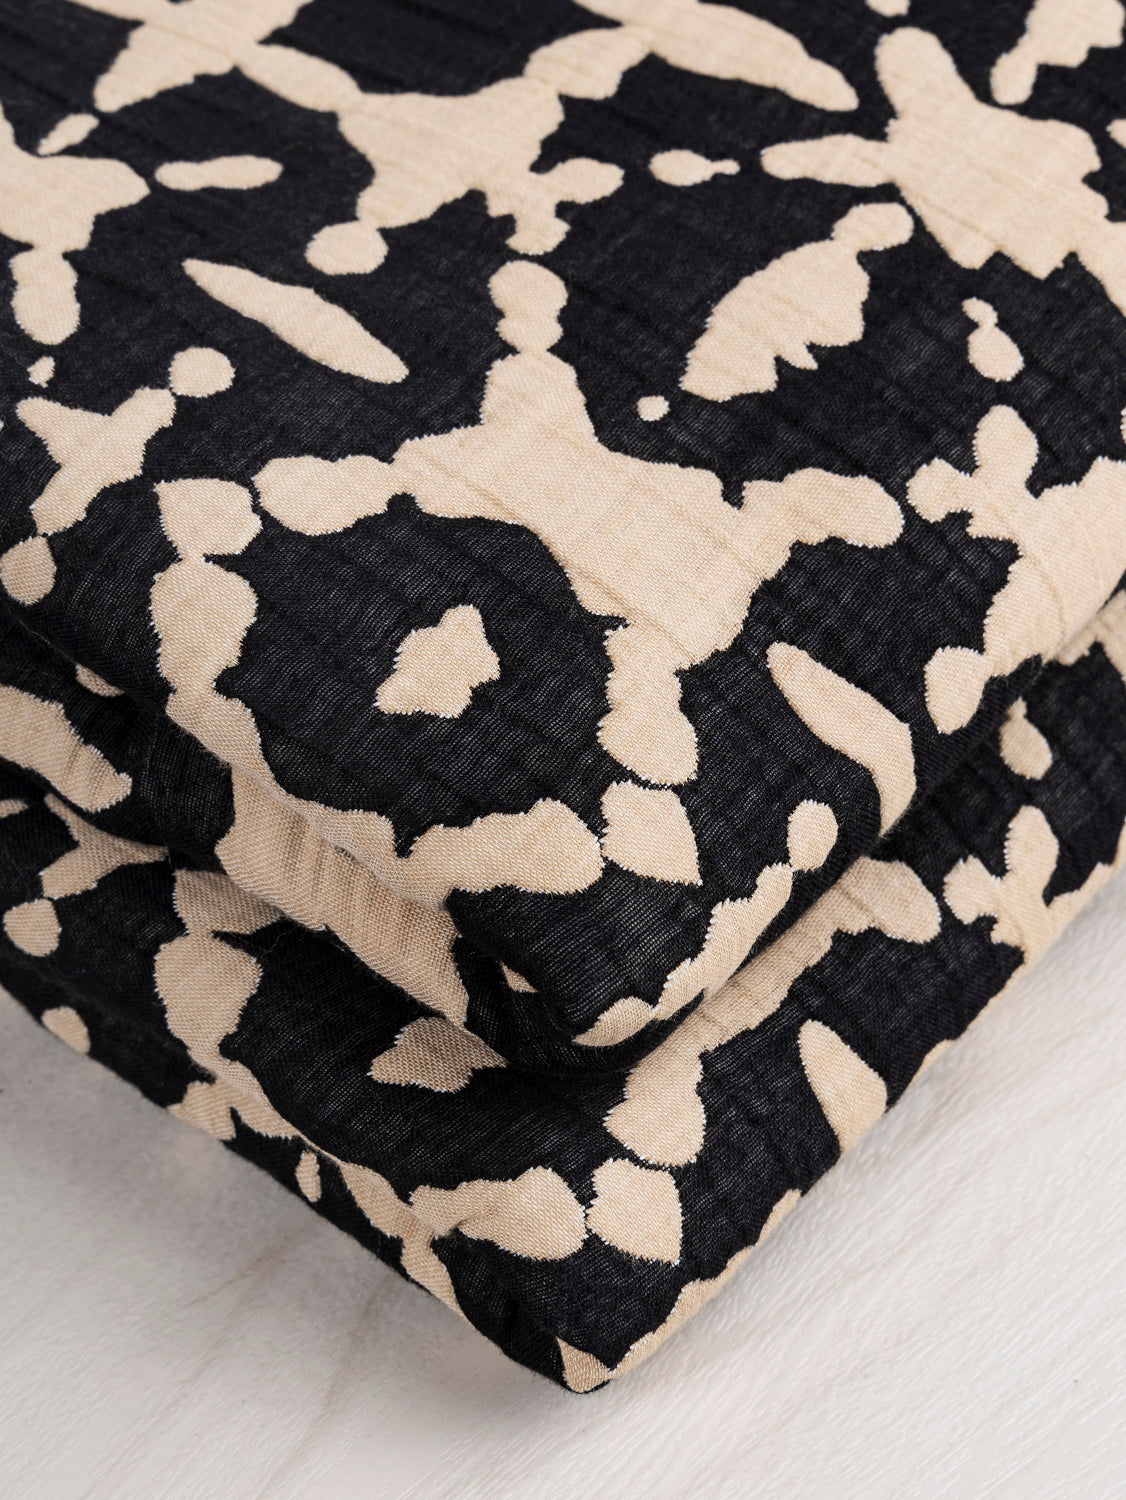 Double Sided Inkblot Quilted Cotton Jacquard with Batting - Tan + Black | Core Fabrics